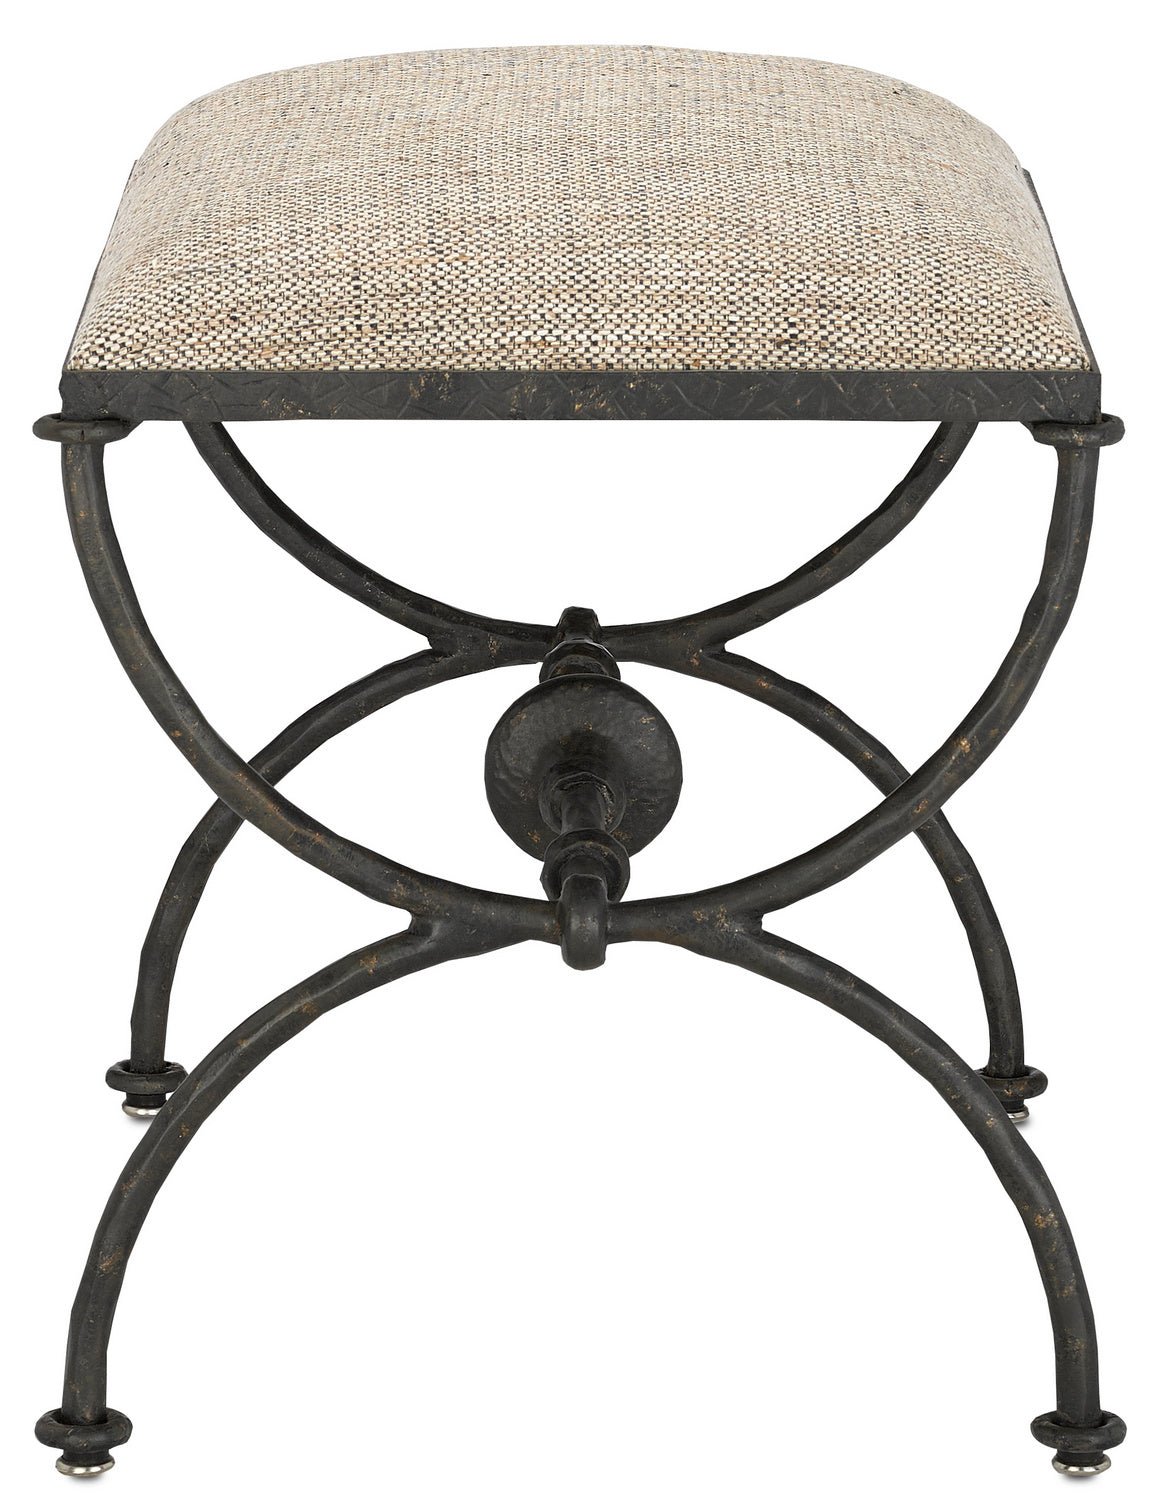 Ottoman from the Agora collection in Rustic Bronze finish